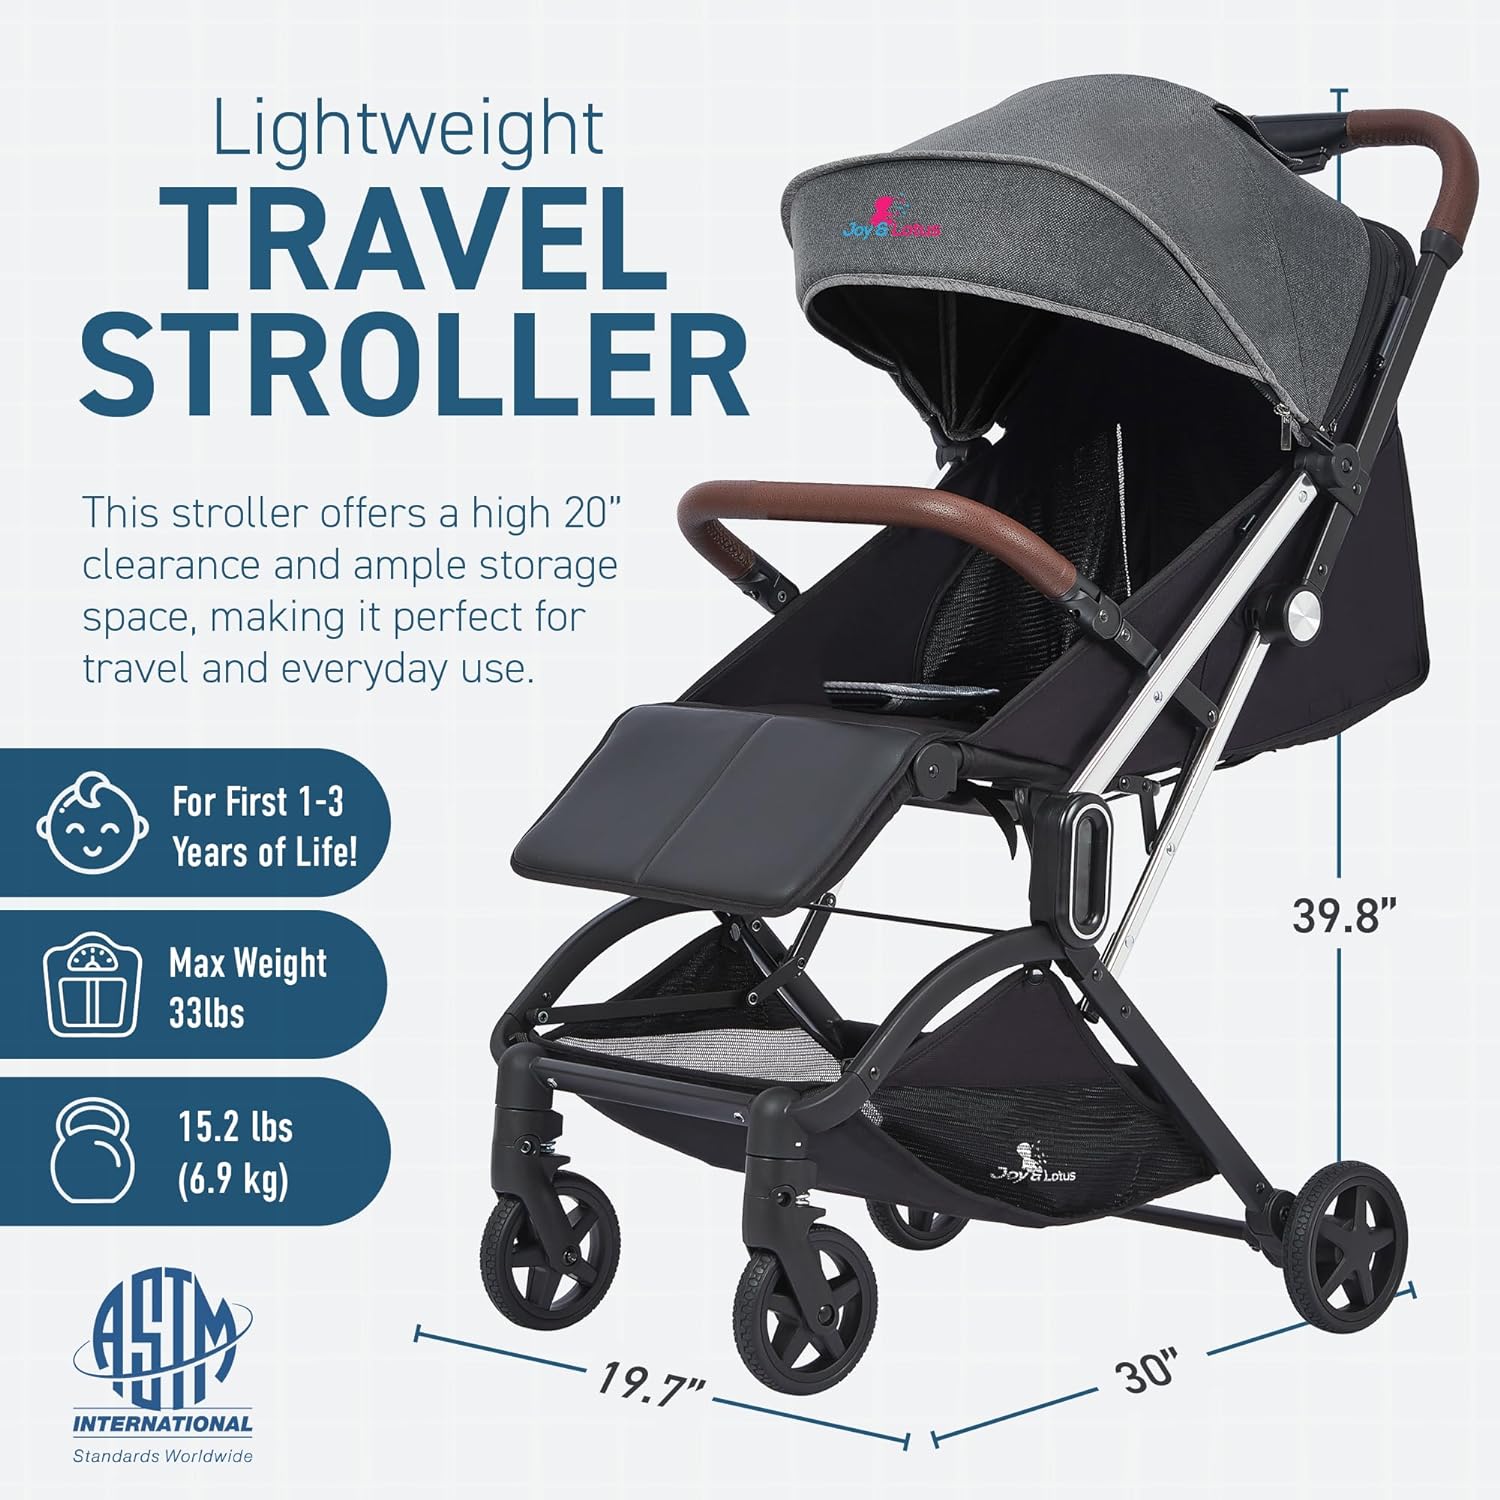 Lightweight Self Folding Baby Stroller, Ultra-Compact with One Hand Gravity Fold, Airplane Ready Travel Stroller, Near Flat Recline Seat with UV and Waterproof Canopy